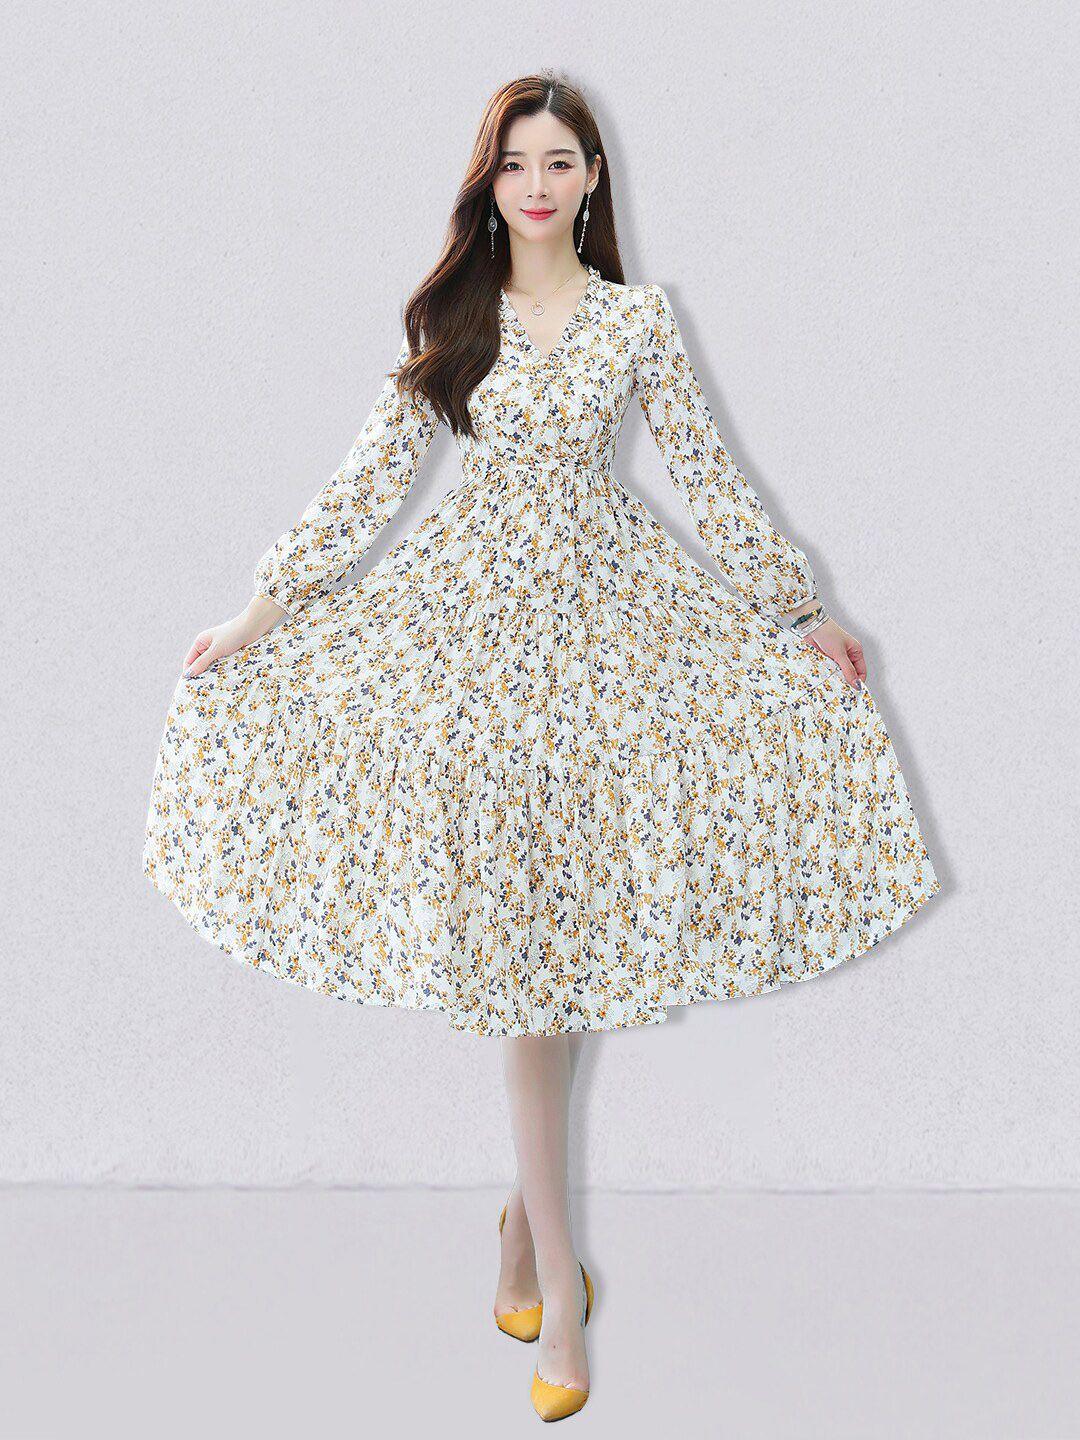 jc collection off white floral midi dress